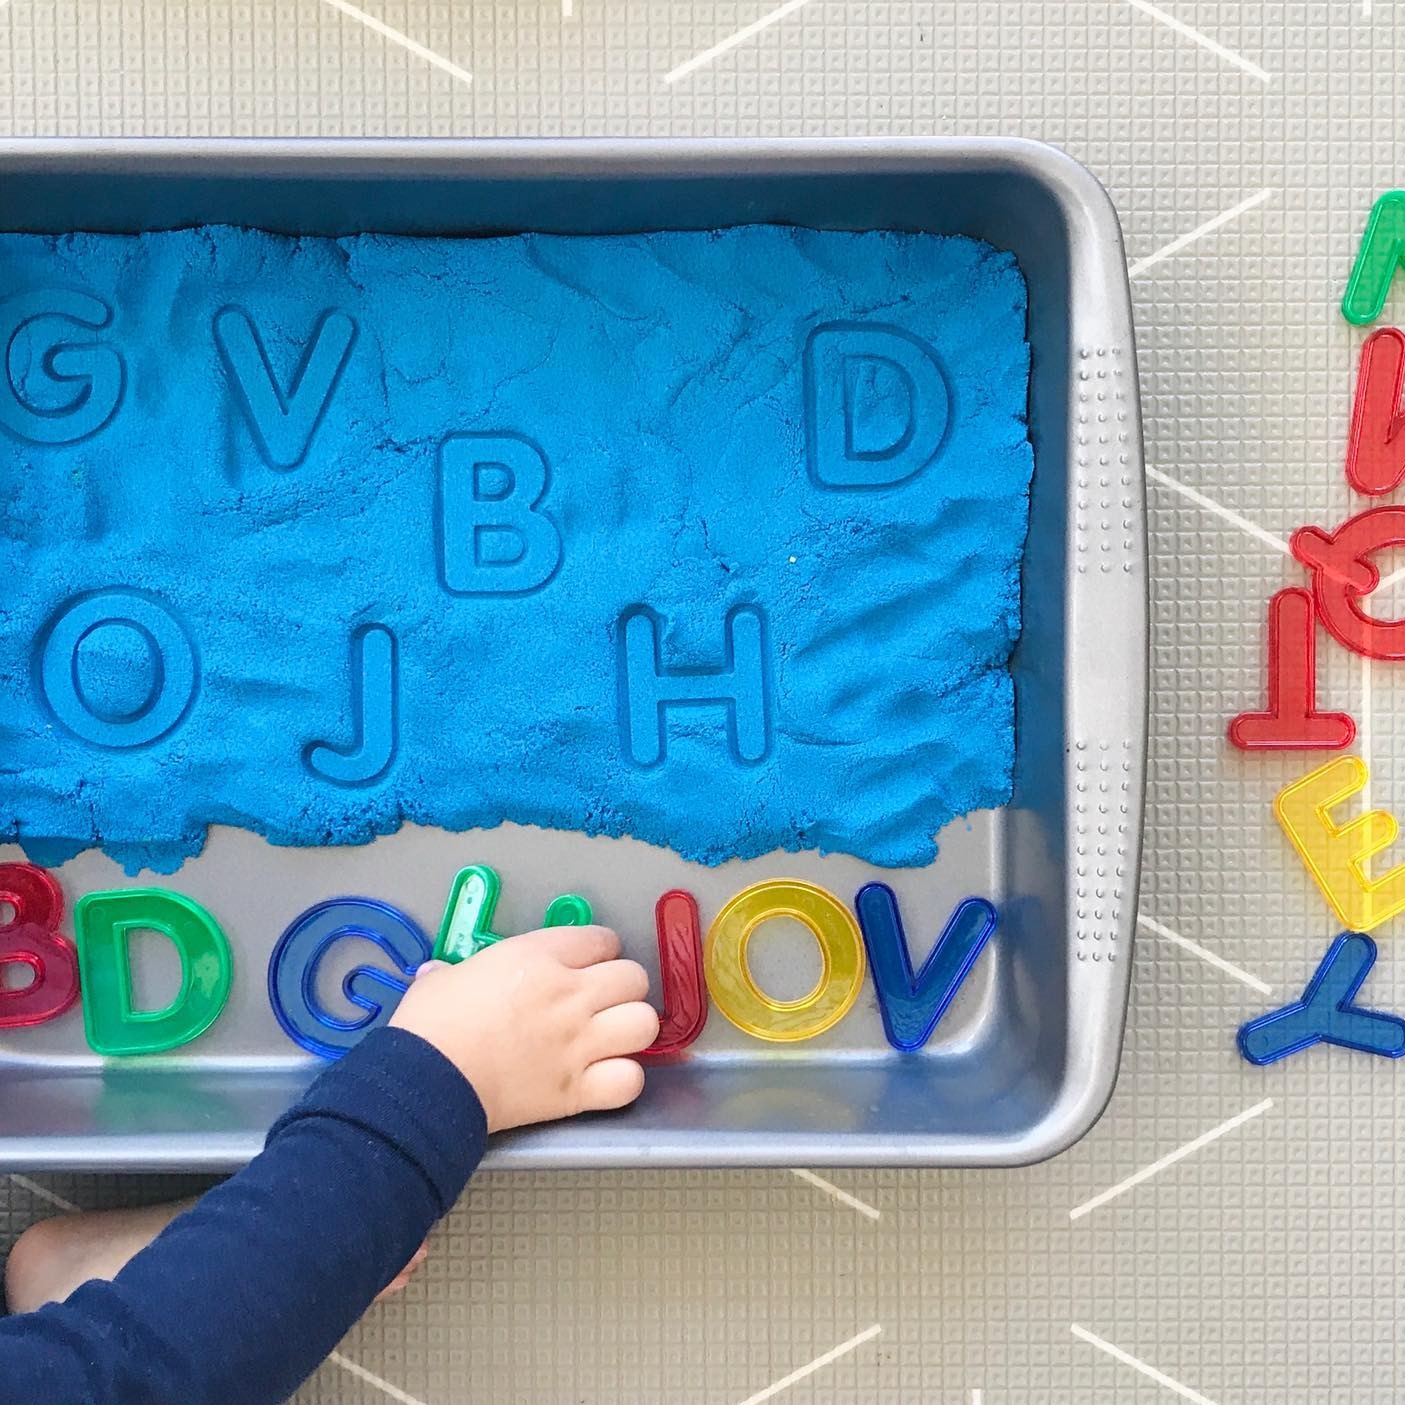 26 Pack Transparent Letters, A set of 26 colourful, transparent letters for sensory light boxes. Each of the Transparent Letters measures approximately 5cm high. The Transparent Letters - Pk26 are excellent for promoting letter recognition in young children. Through playing with these Transparent Letters - Pk26 on the light box, children can learn basic literacy skills and learn to identify word and letter shape and also play with making basic word formations. These Transparent Letters can also be used with